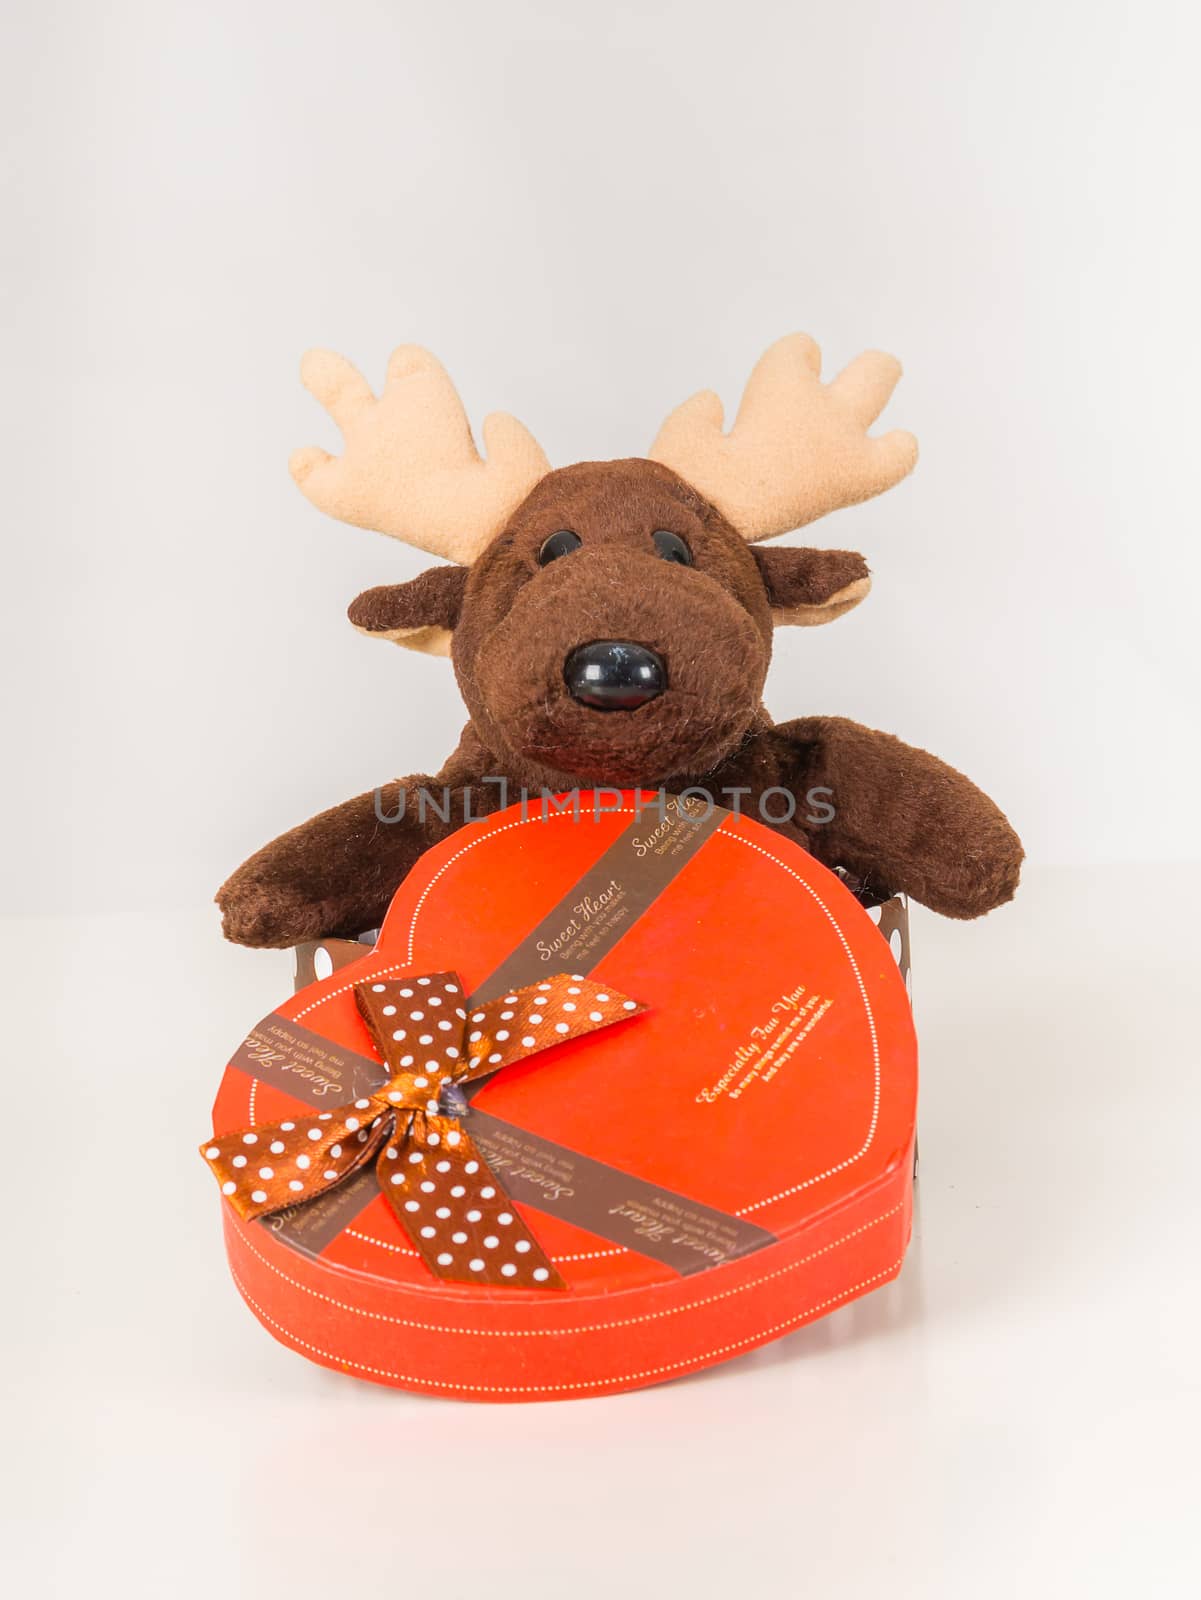 Deer doll and heart-shaped gift box on white background. by supirak